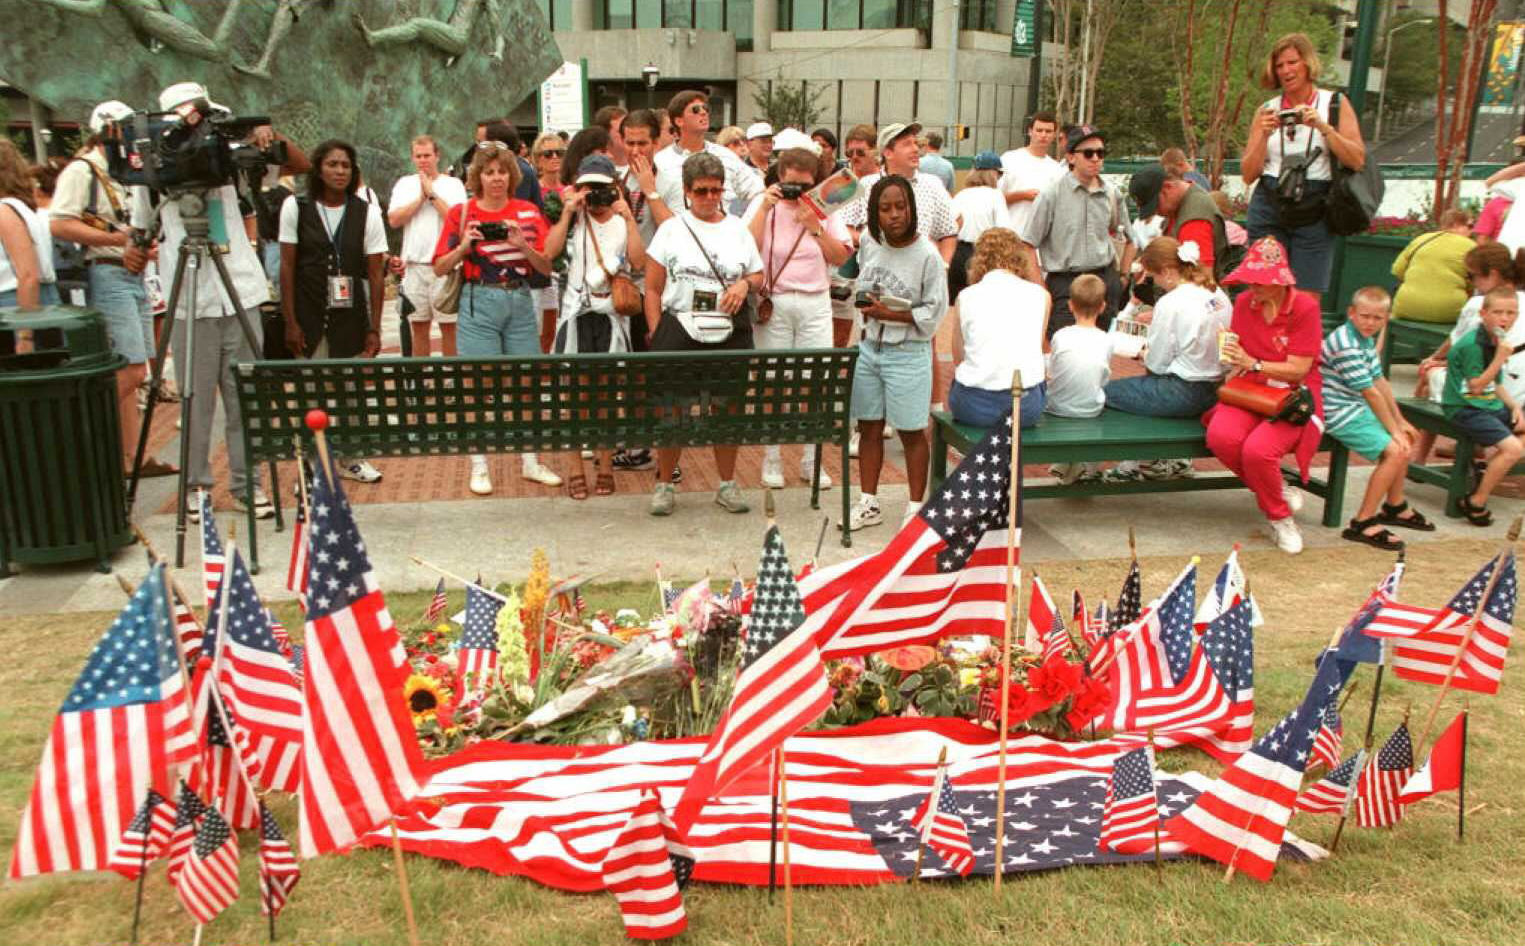 Flags and flowers are laid at the site of the bombing at the Centennial Olympic Park in Atlanta in July 1996 ©Getty Images